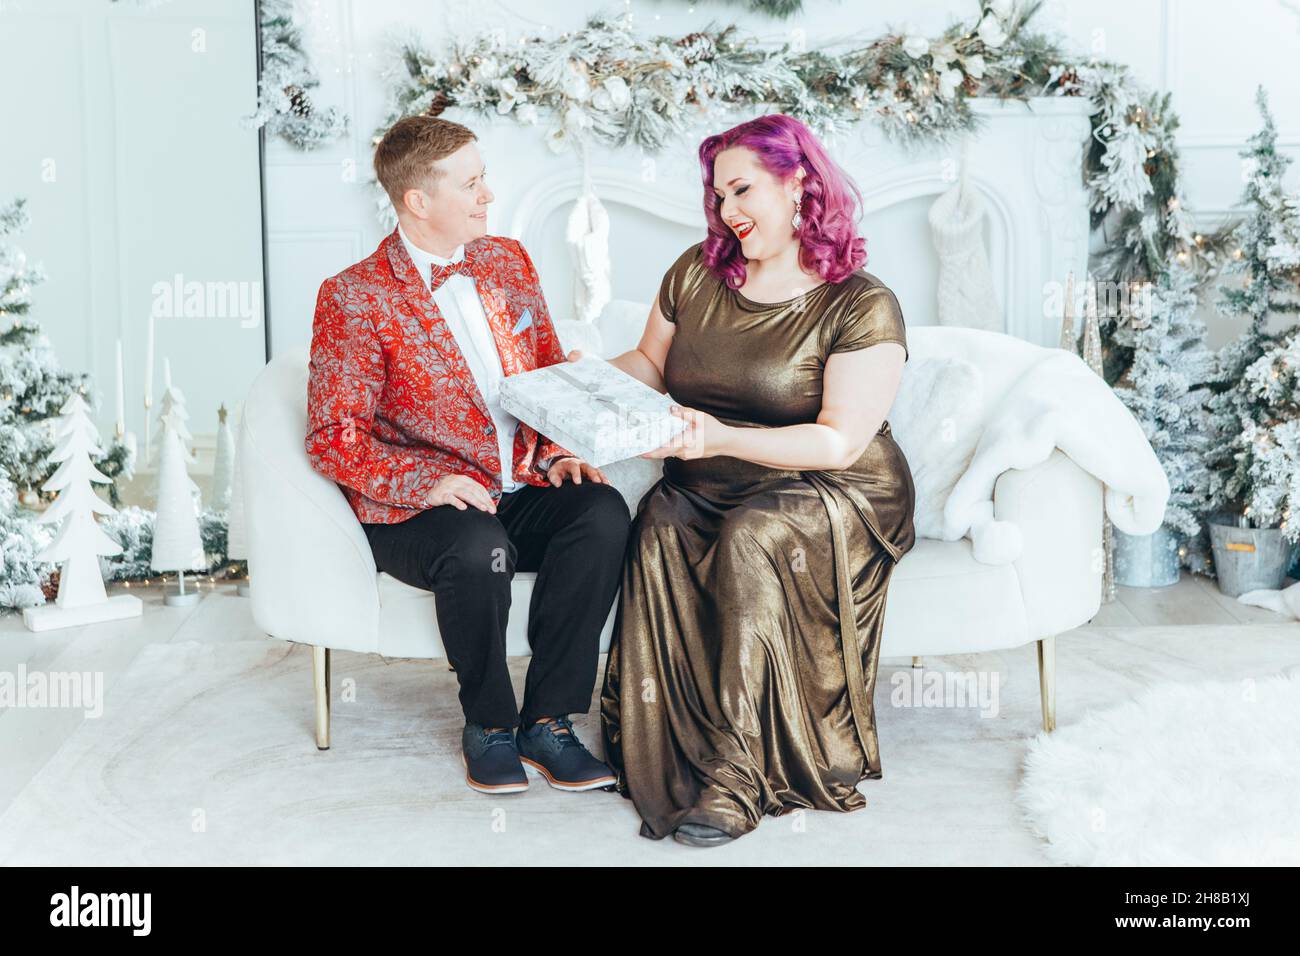 LGBTQ lesbian couple celebrating Christmas New Year winter holiday. Gay female with butch partner giving gift boxes with presents to each other on Chr Stock Photo